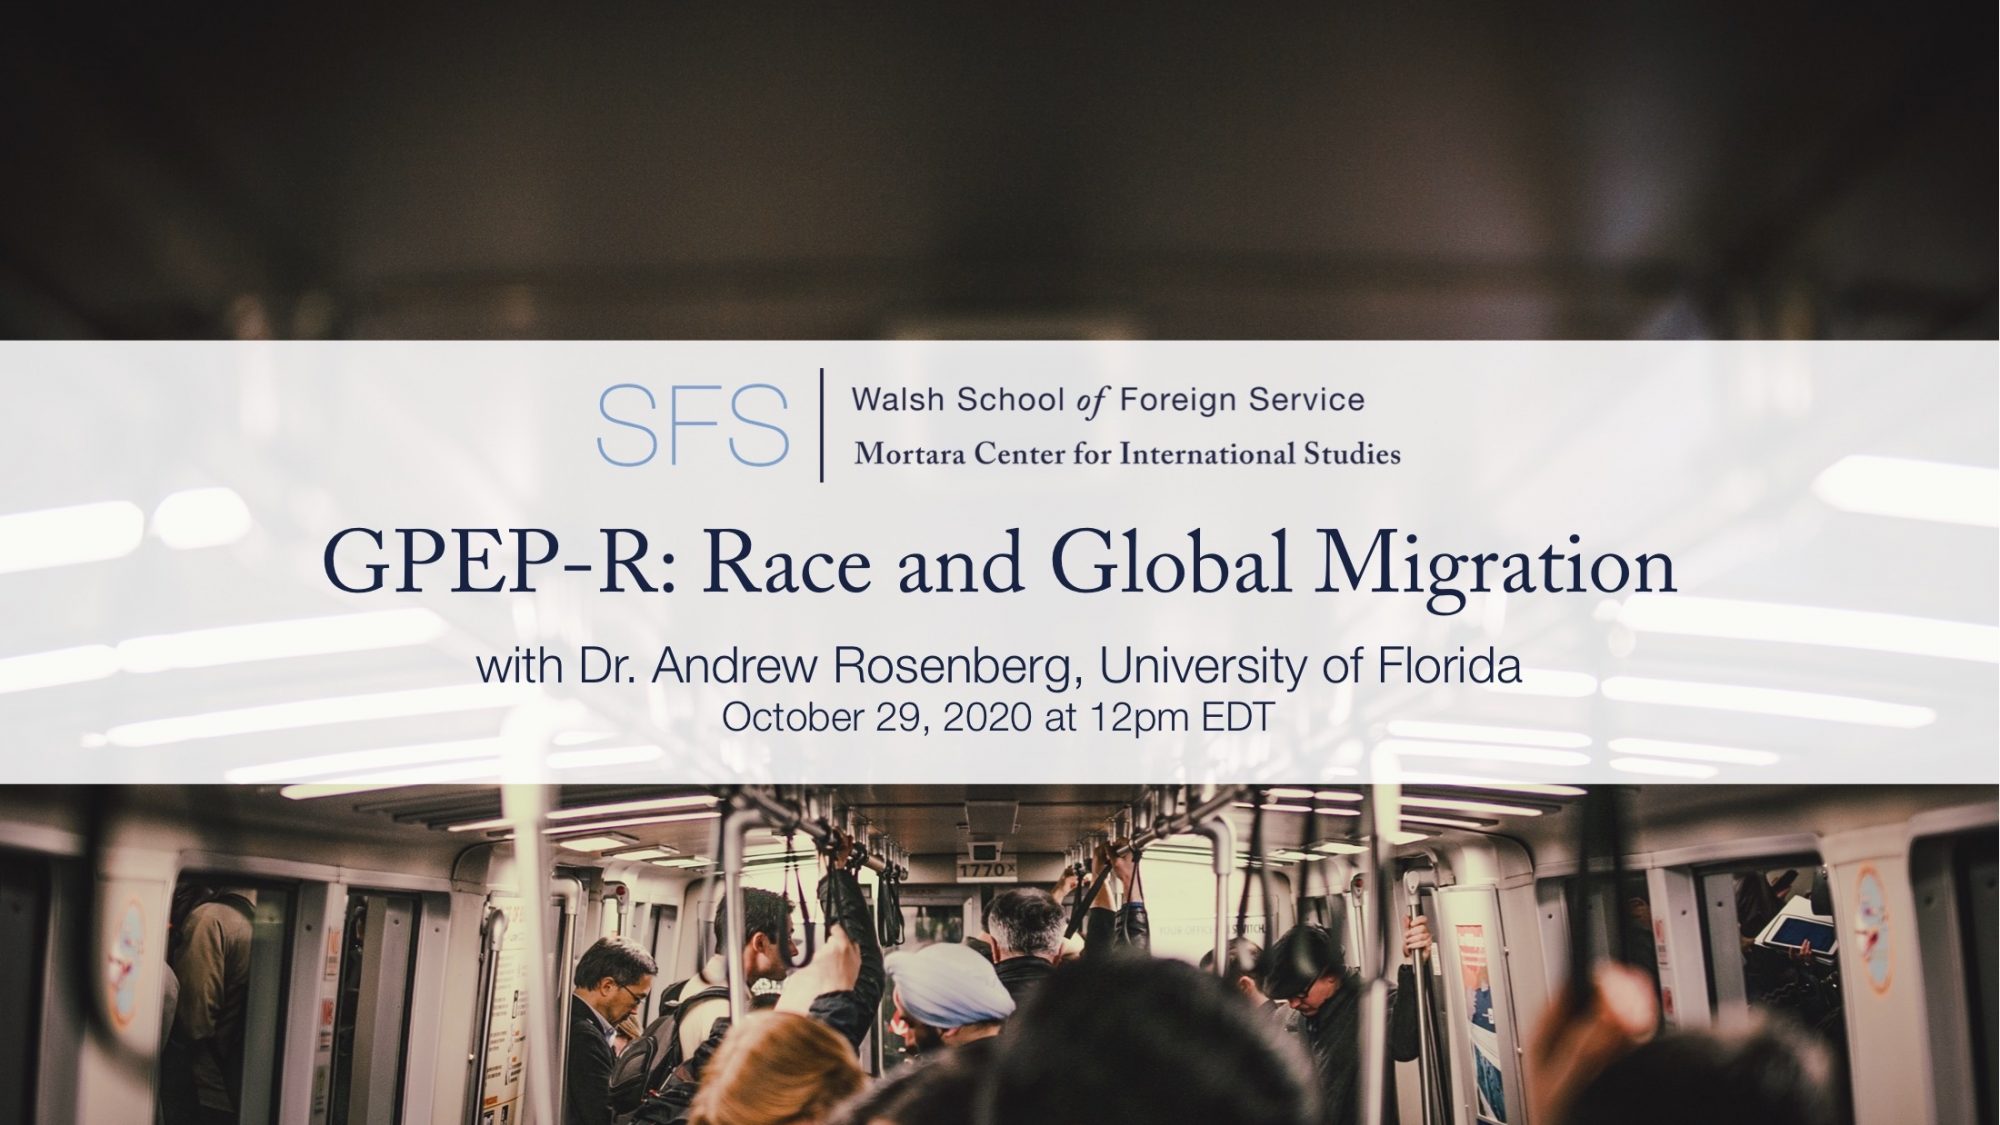 The Mortara Center presents GPEP-R: Race and Global Migration with Dr. Andrew Rosenberg, University of Florida on October 29 at 12pm EDT